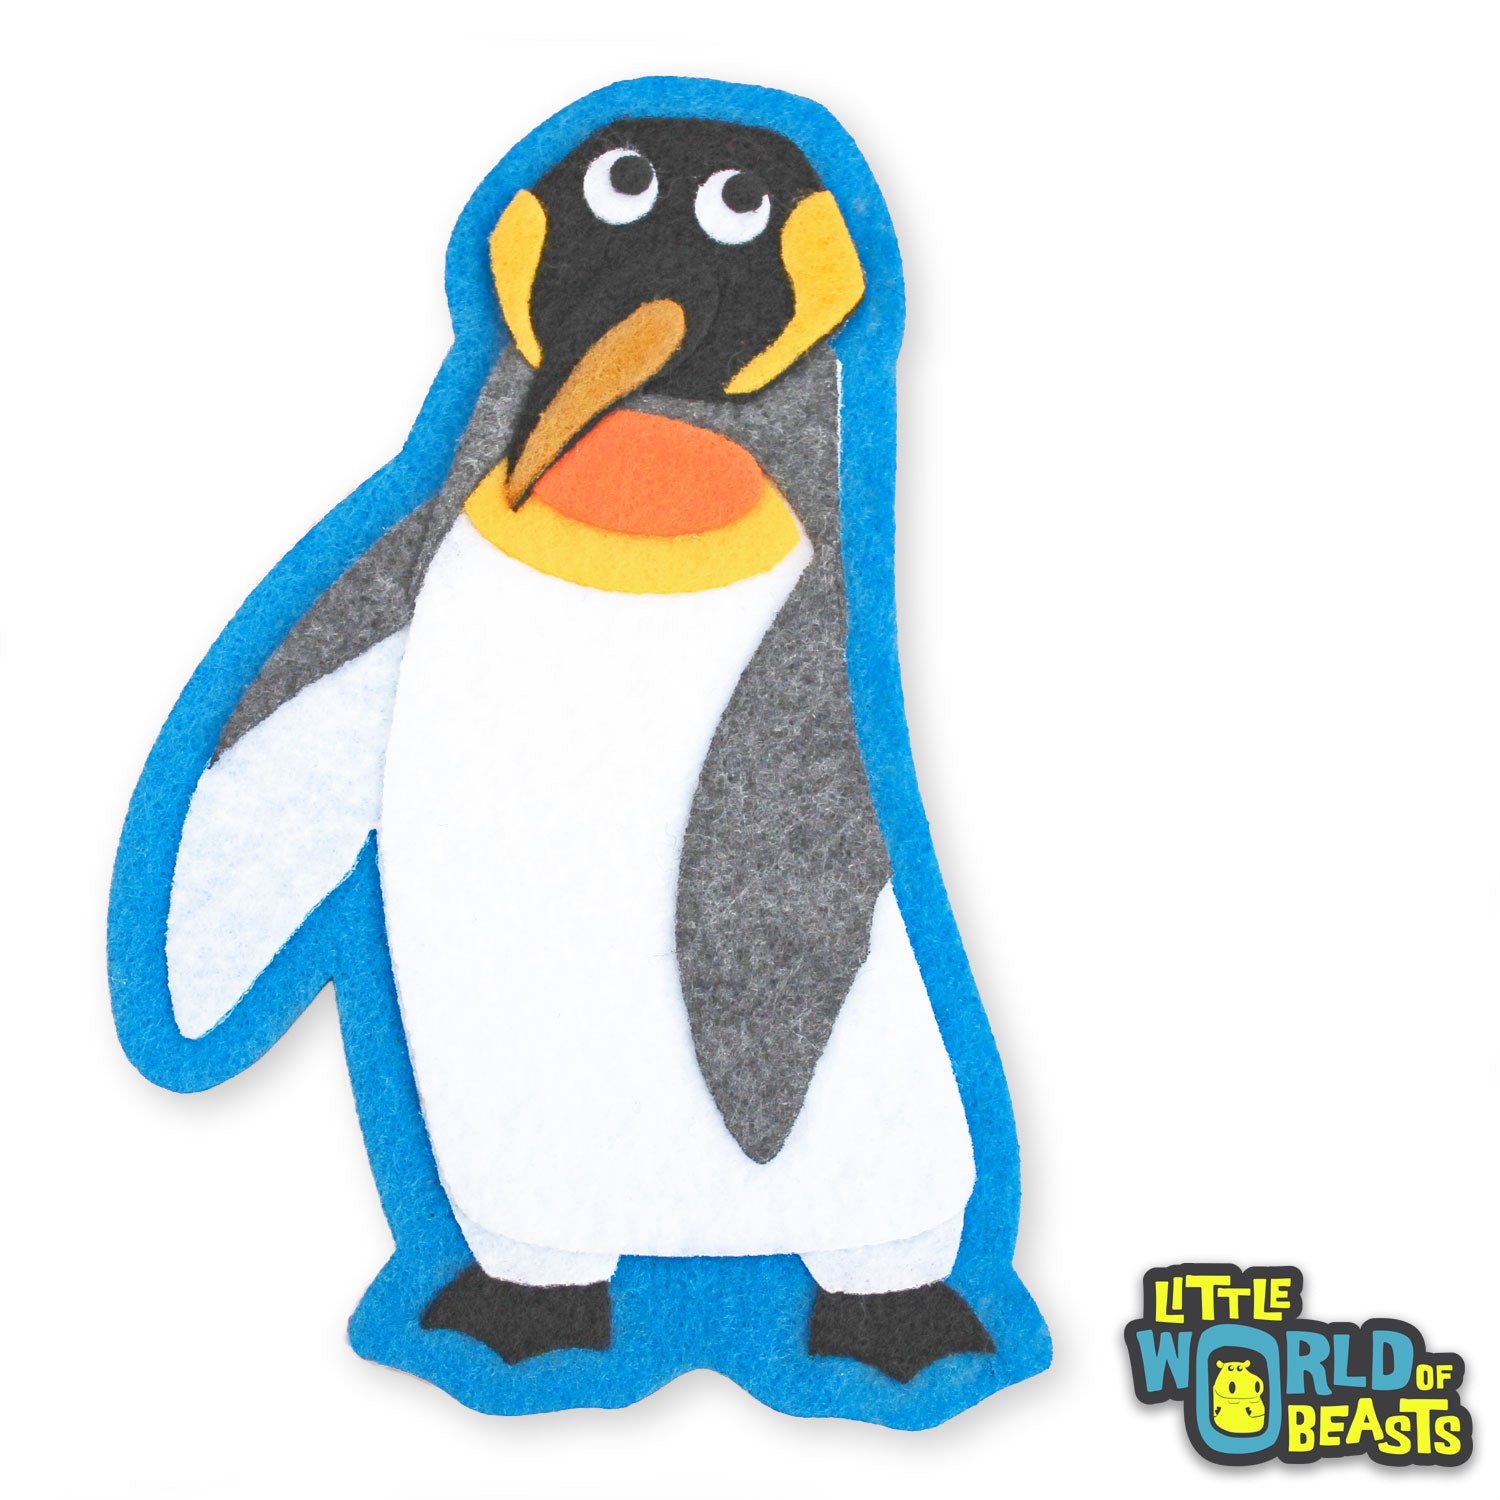 Bowtie the King Penguin - Iron On or Sew On Felt Animal Patch - Little World of Beasts